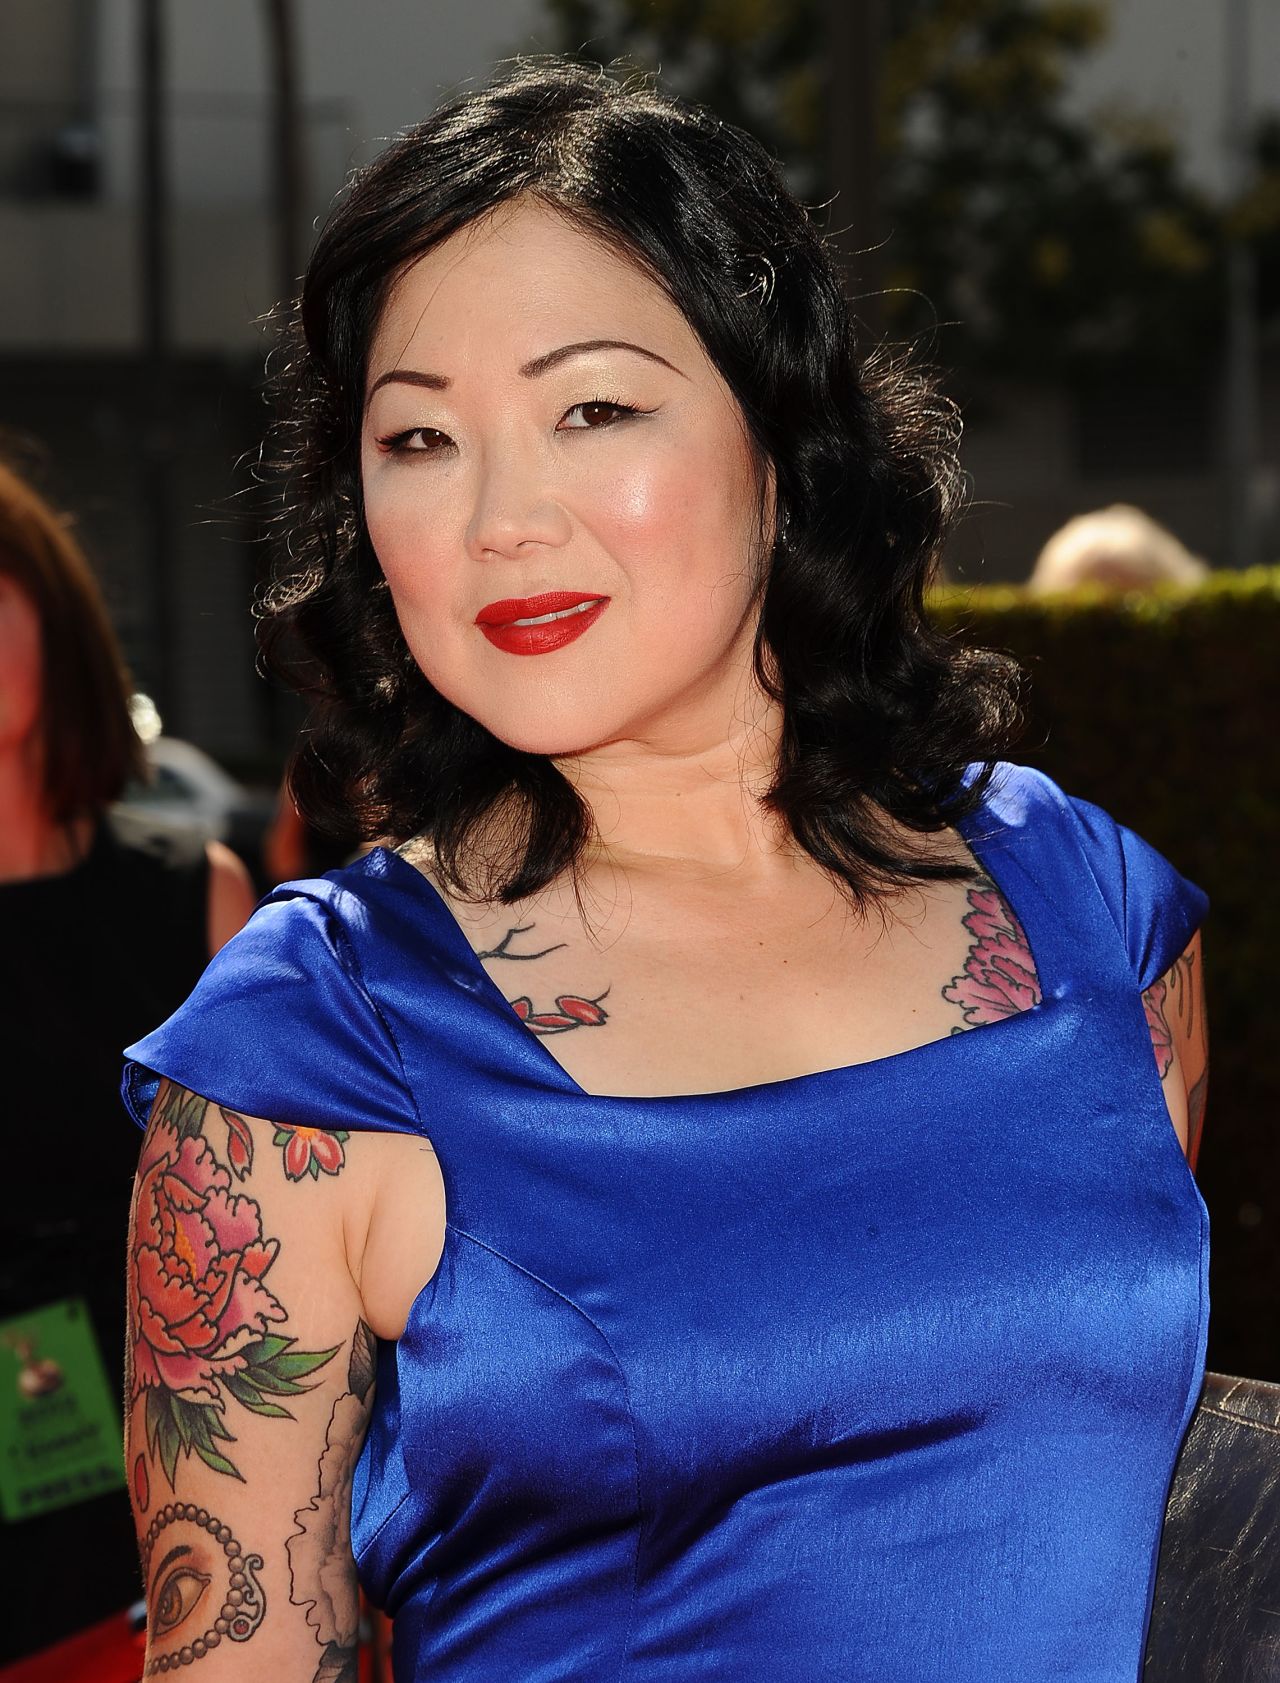 <a href="http://www.margaretcho.com/2012/09/06/kids/" target="_blank" target="_blank">In a personal blog post</a> in 2012, comedienne Margaret Cho spoke out on her childlessness, declaring: "I am not sure if I have wanted them or never wanted them." 